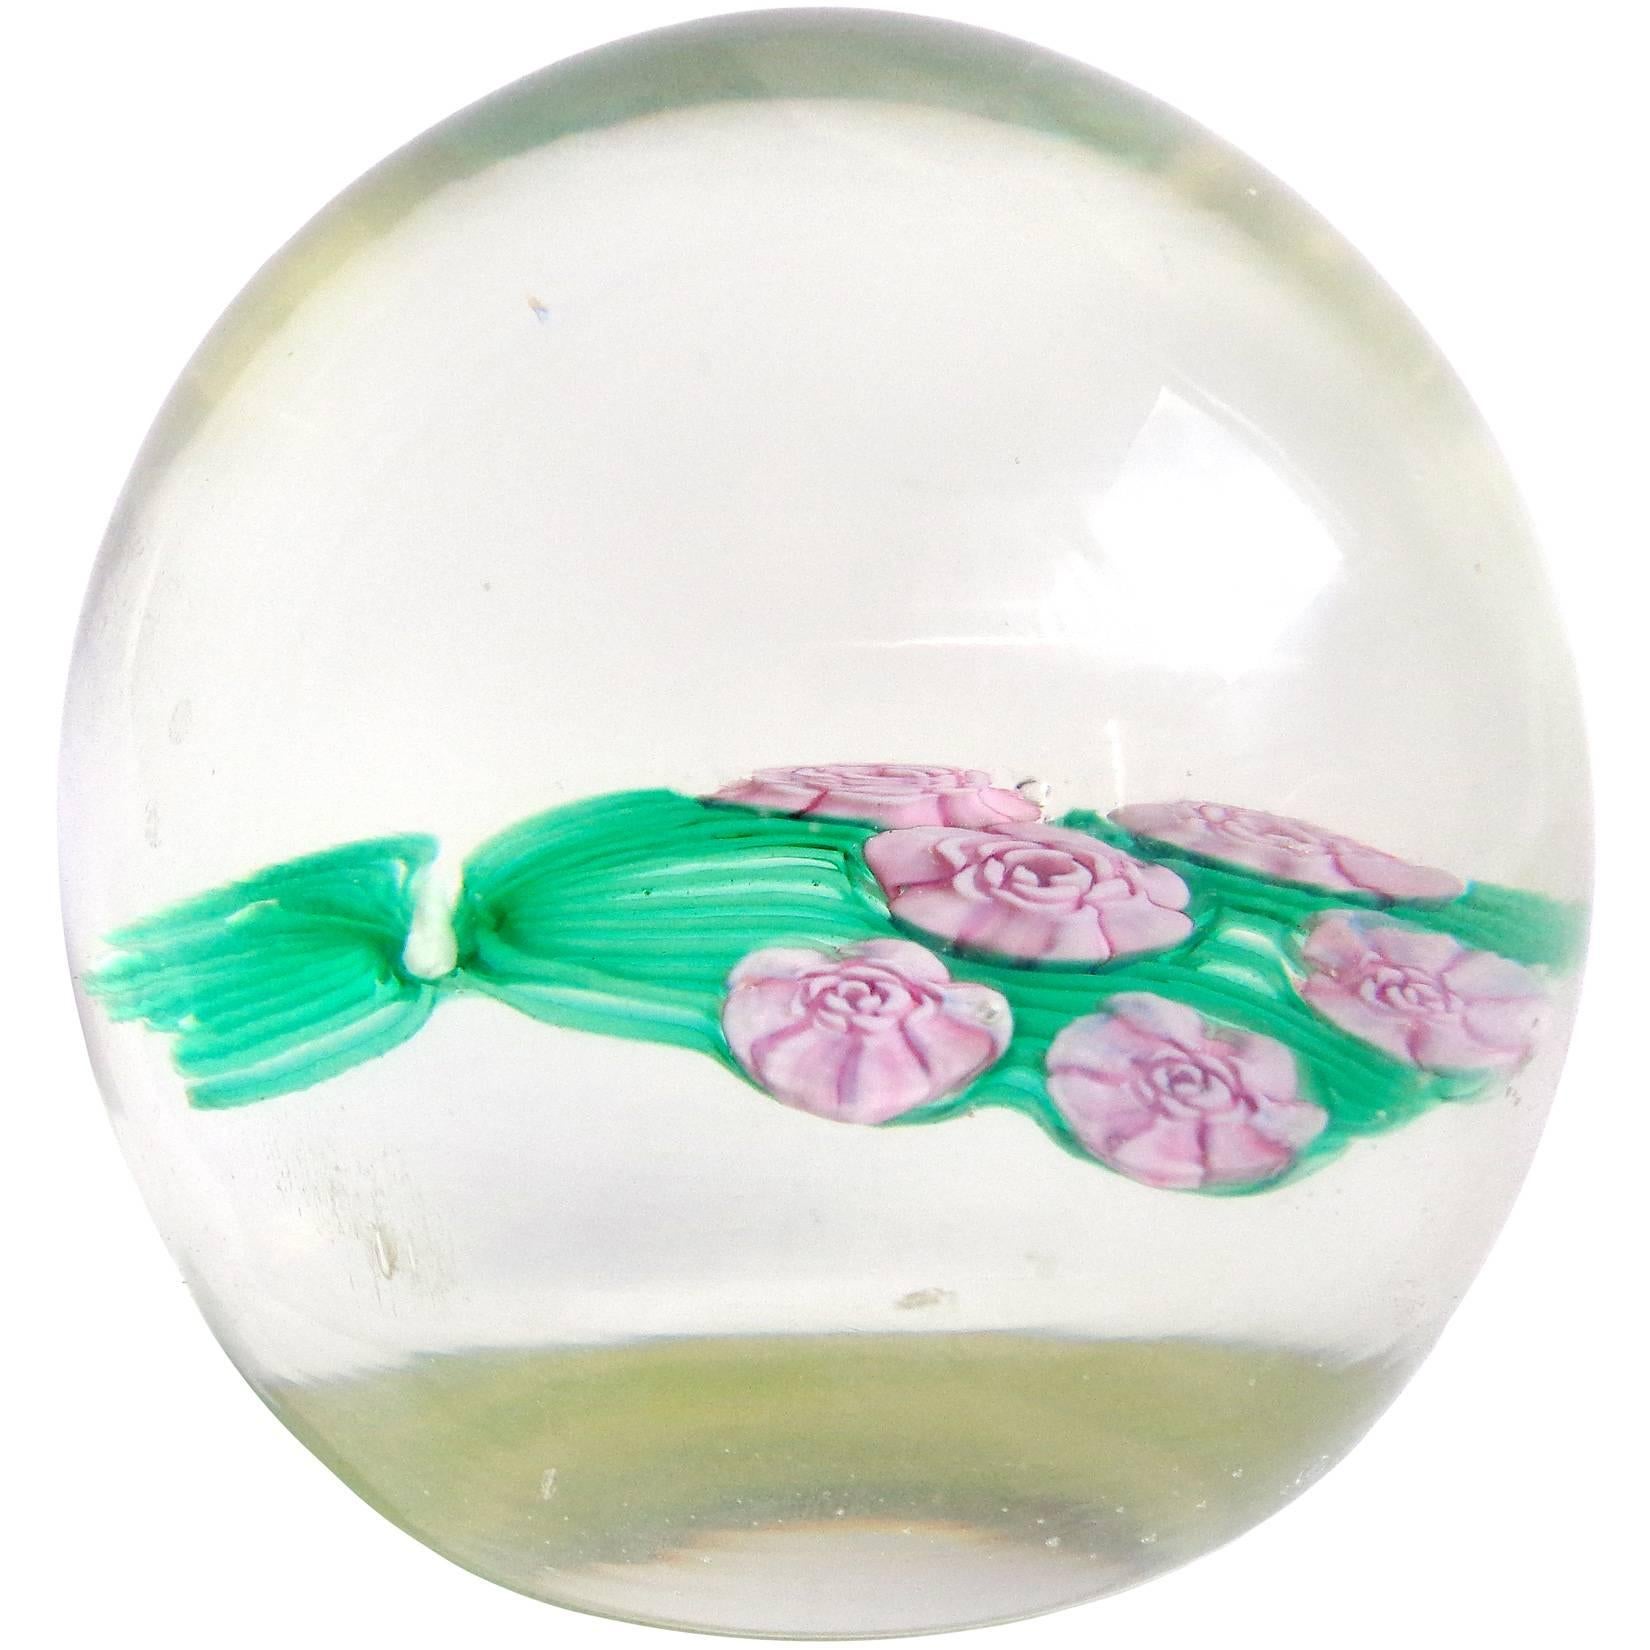 Beautiful set of Murano handblown flower design Italian art glass paperweights. Documented to the Fratelli Toso Company. One is a large pink and lavender spots flower, the second is a flower bouquet made with millefiori roses and third a pair of